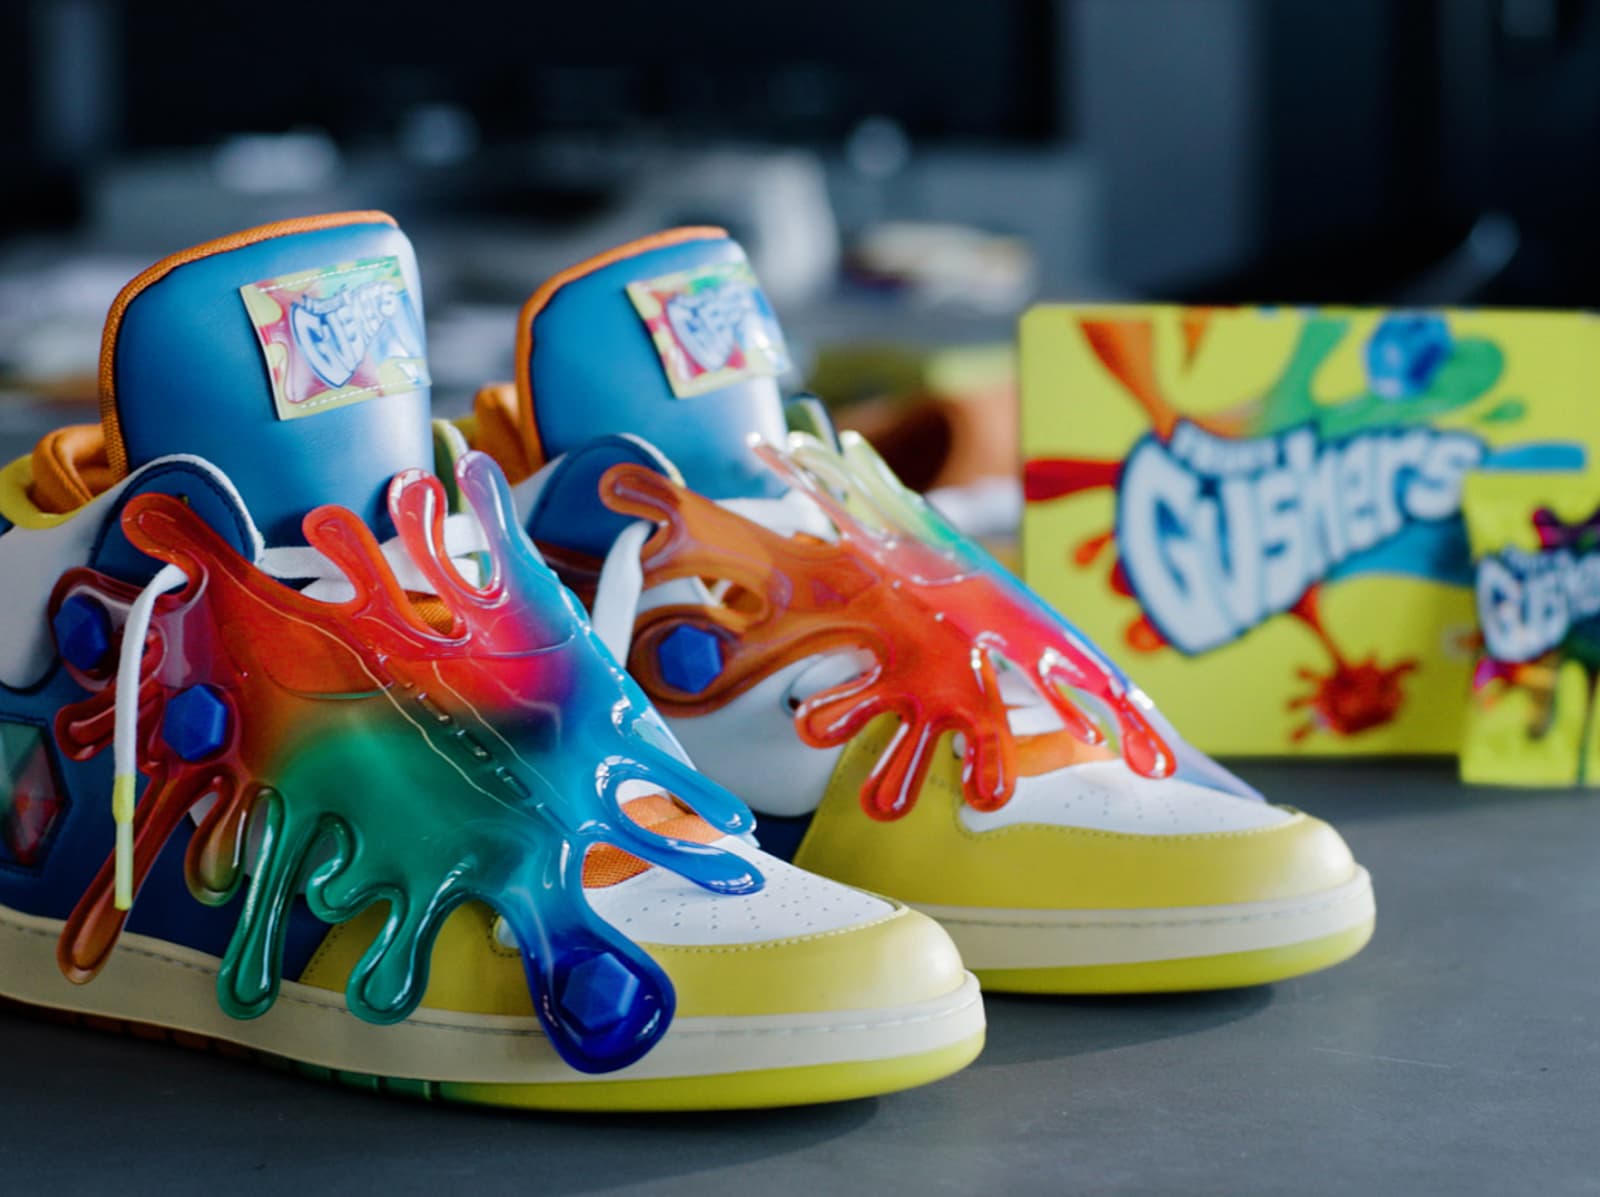 Gushers designer sneakers next to a box of Gushers fruit snacks